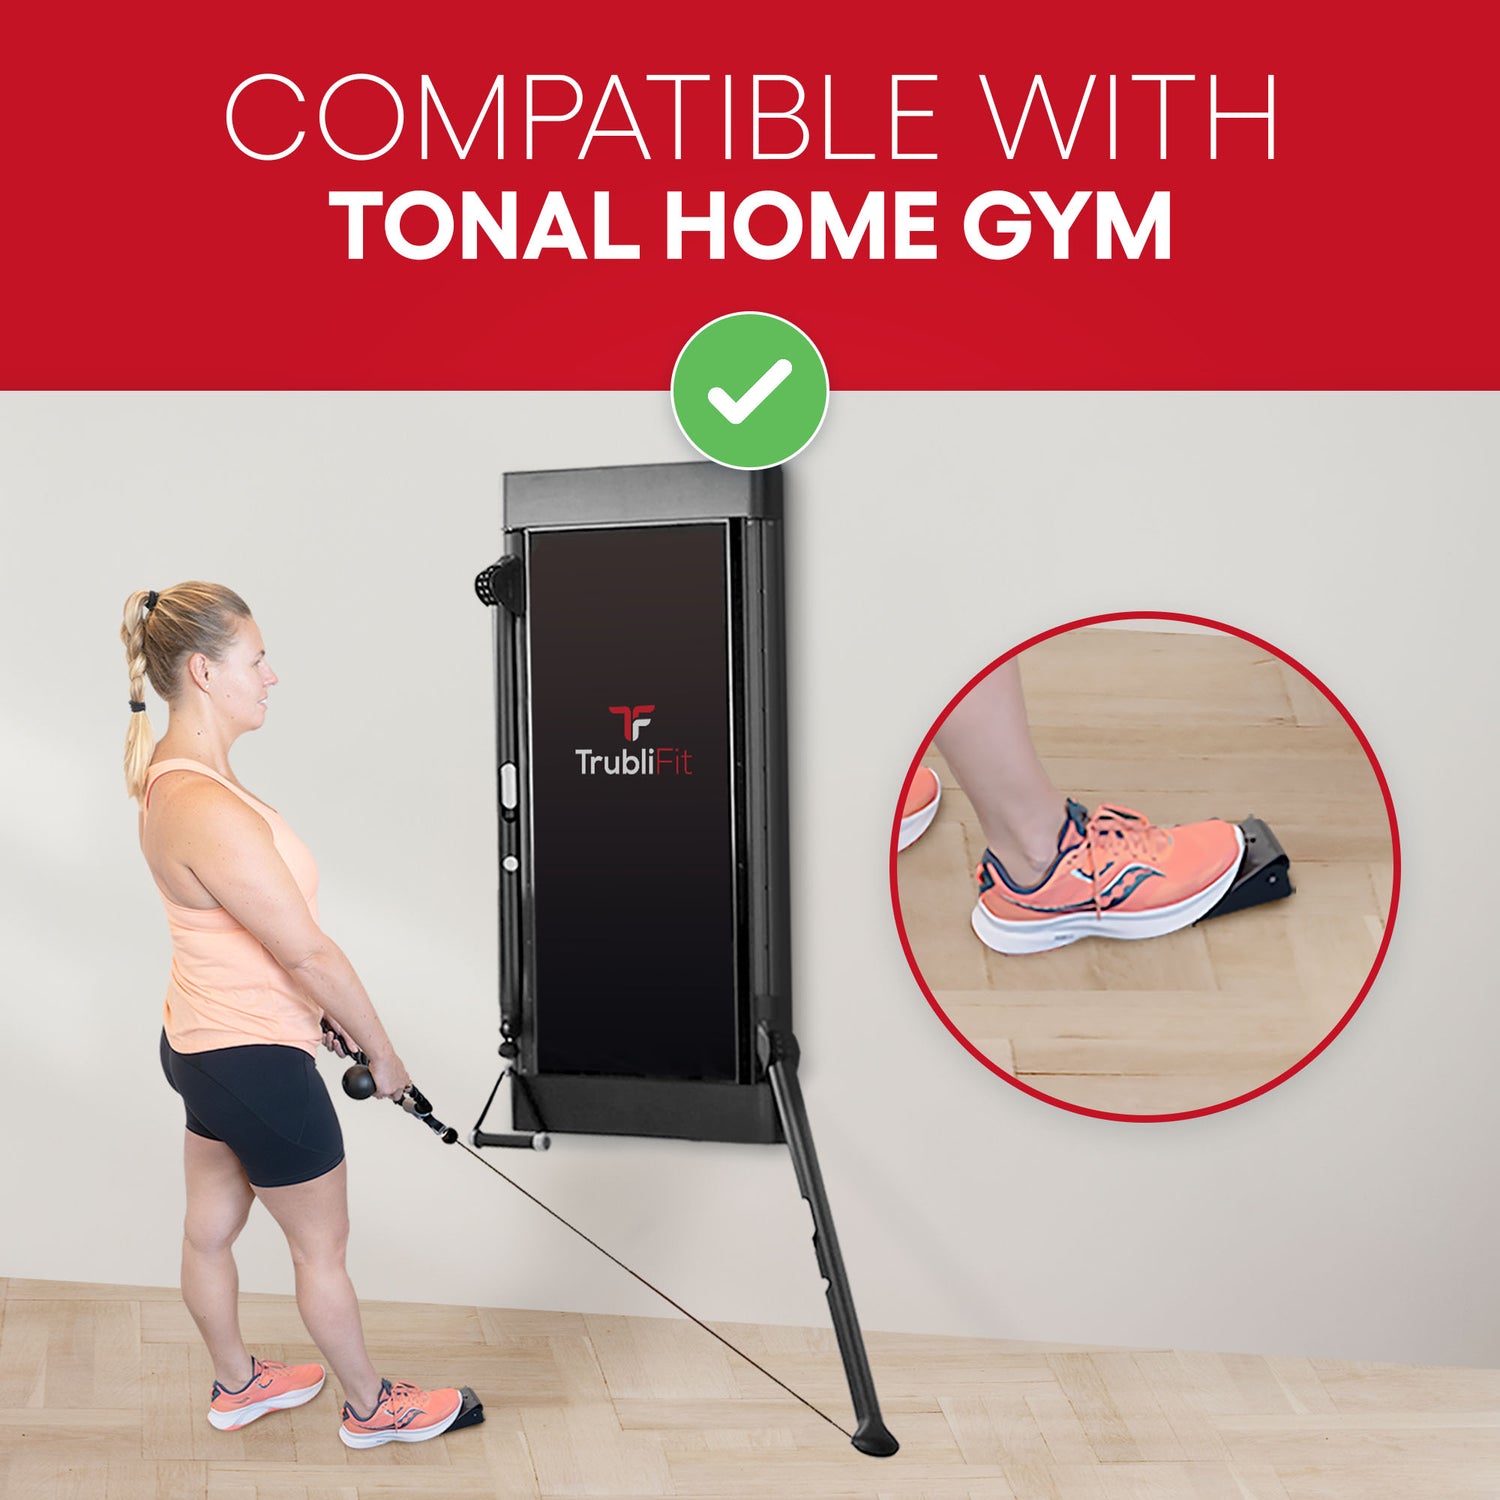 Compatible with the Tonal Home Gym